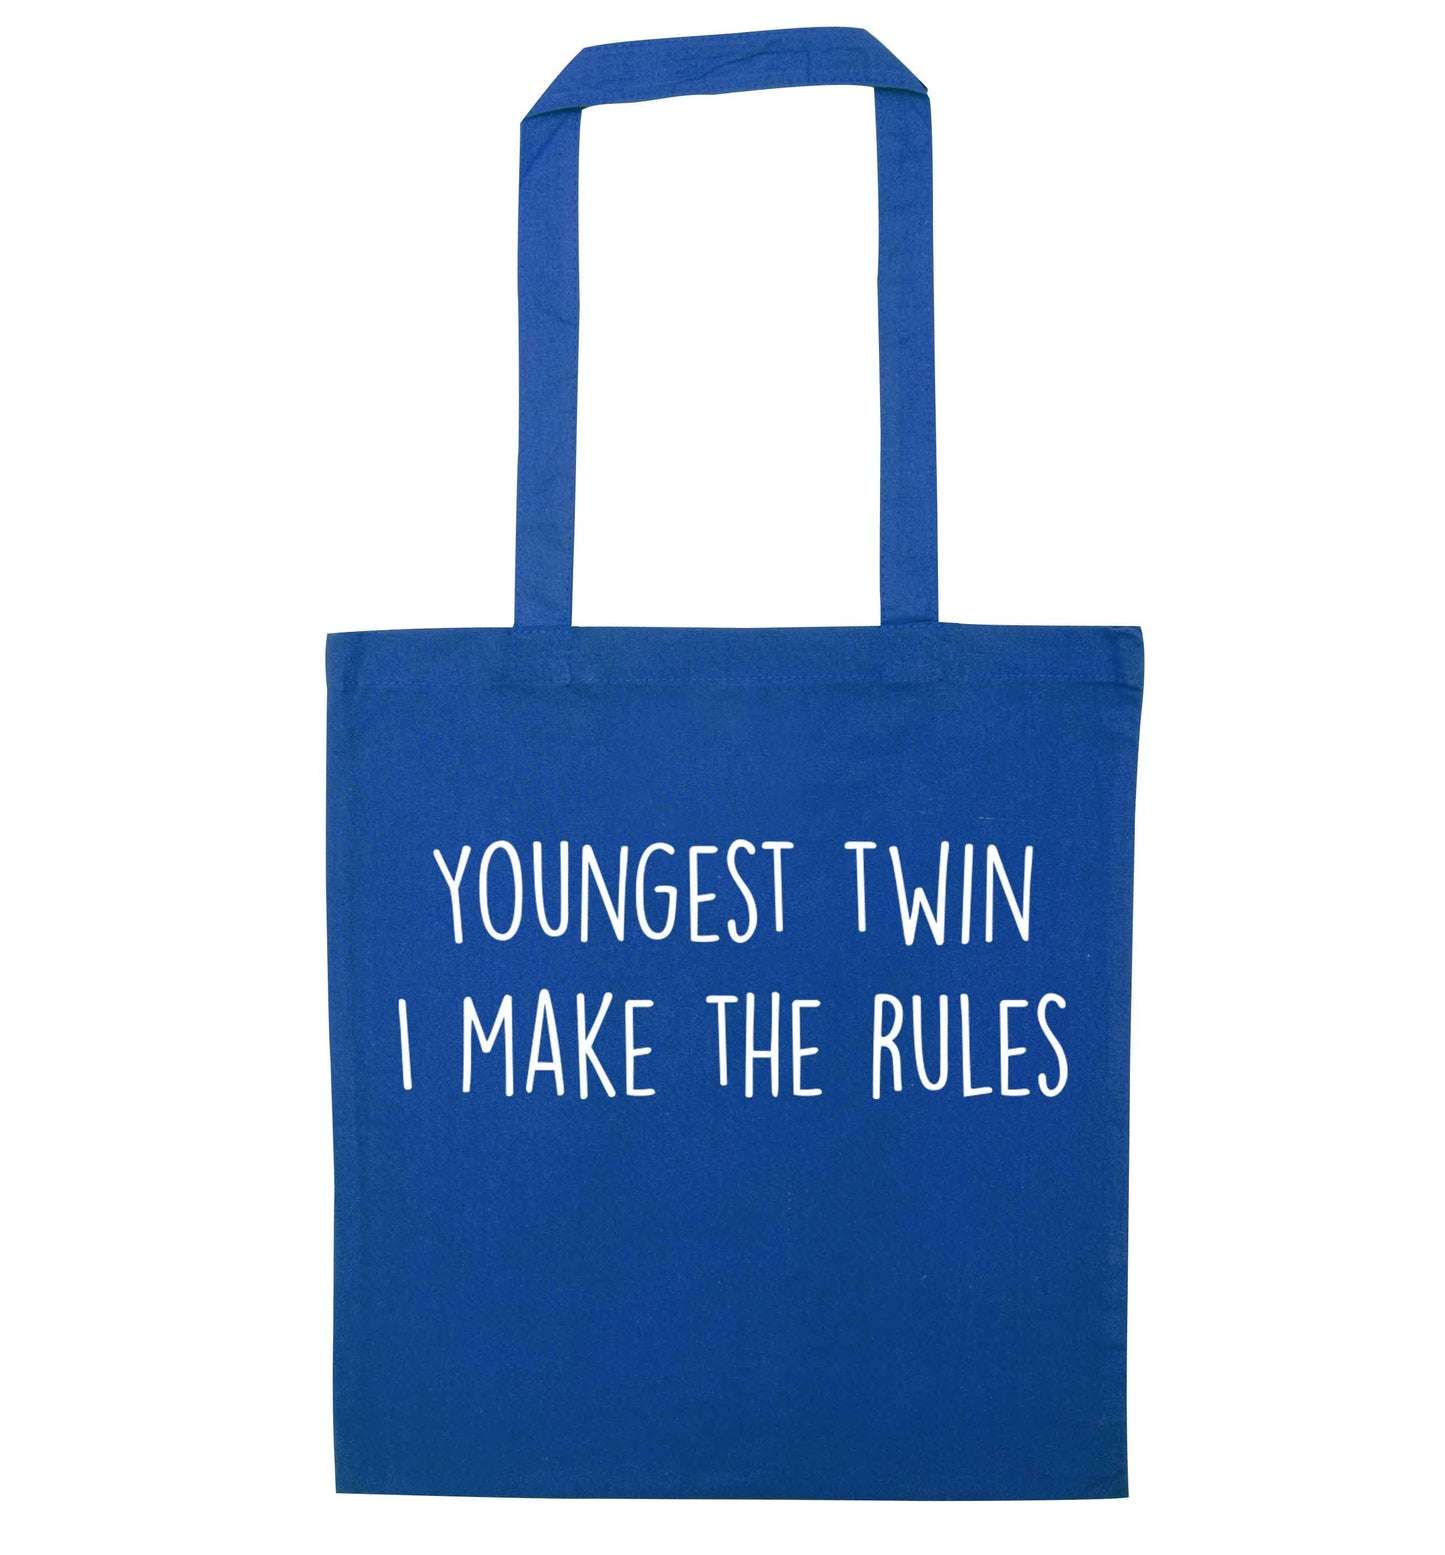 Youngest twin I make the rules blue tote bag